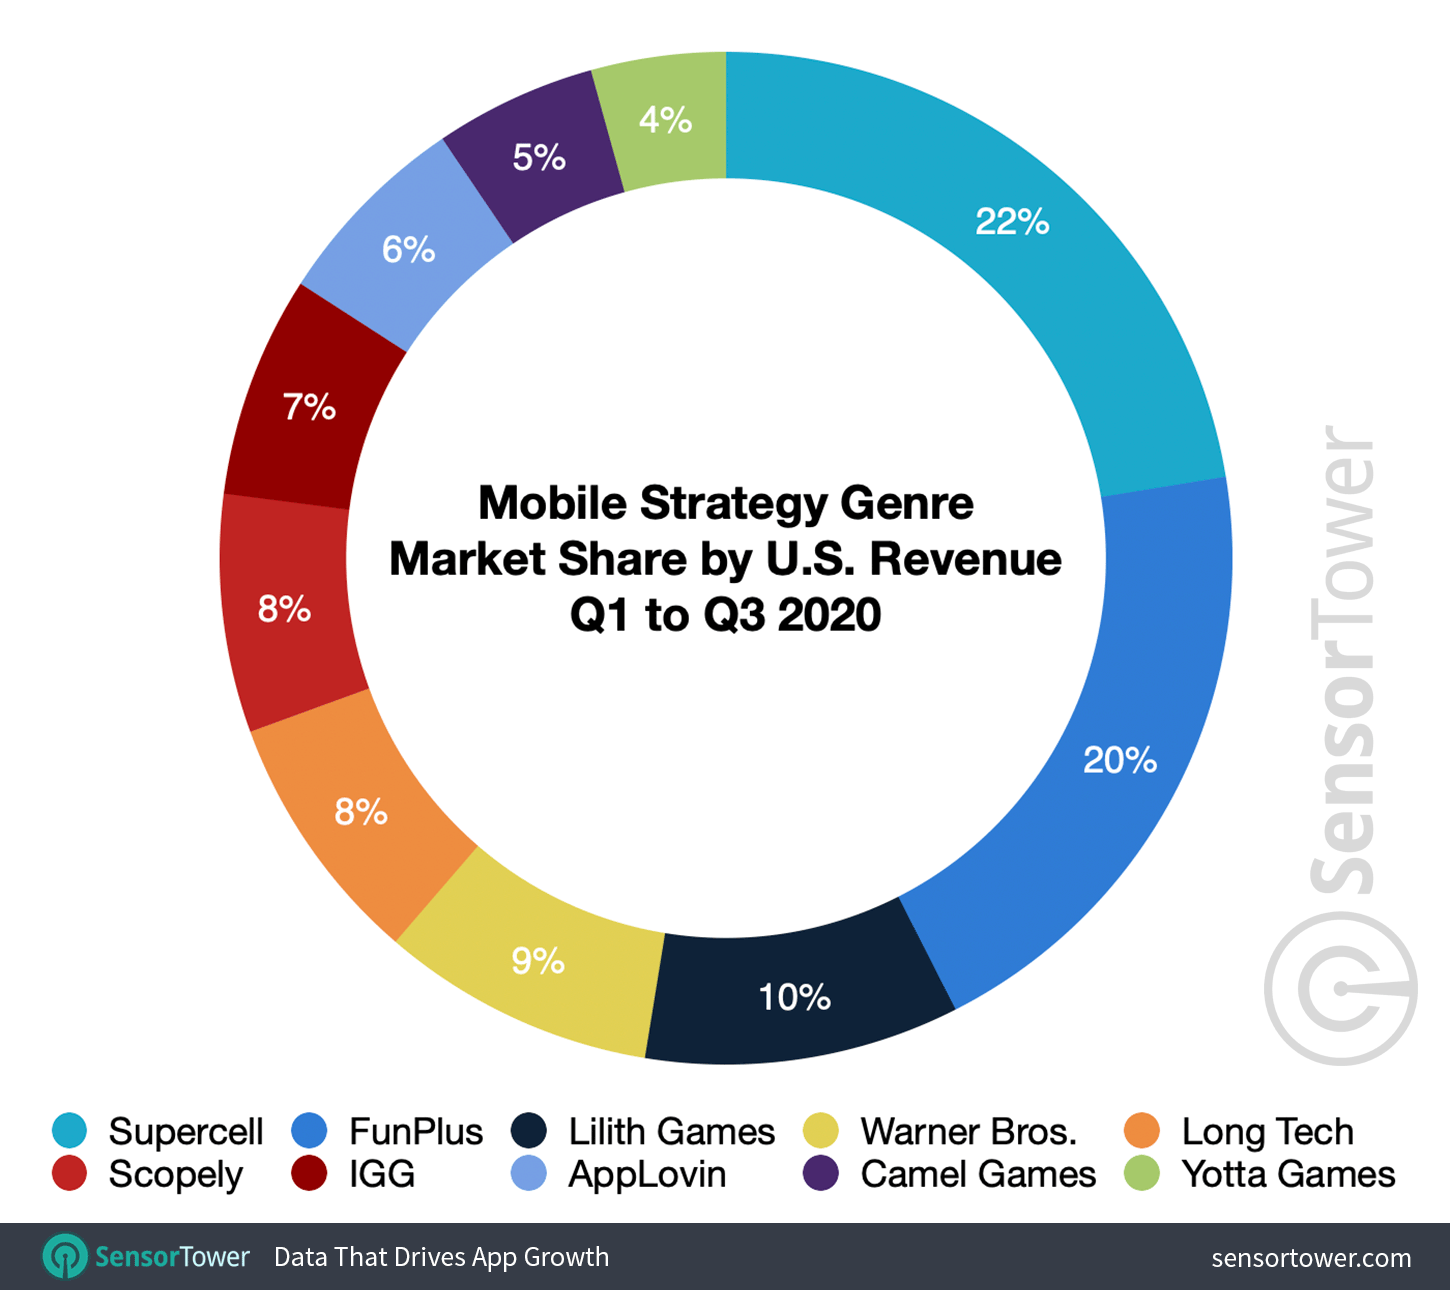 Mobile Strategy Genre Market Share by U.S. Revenue for Q1 to Q3 2020